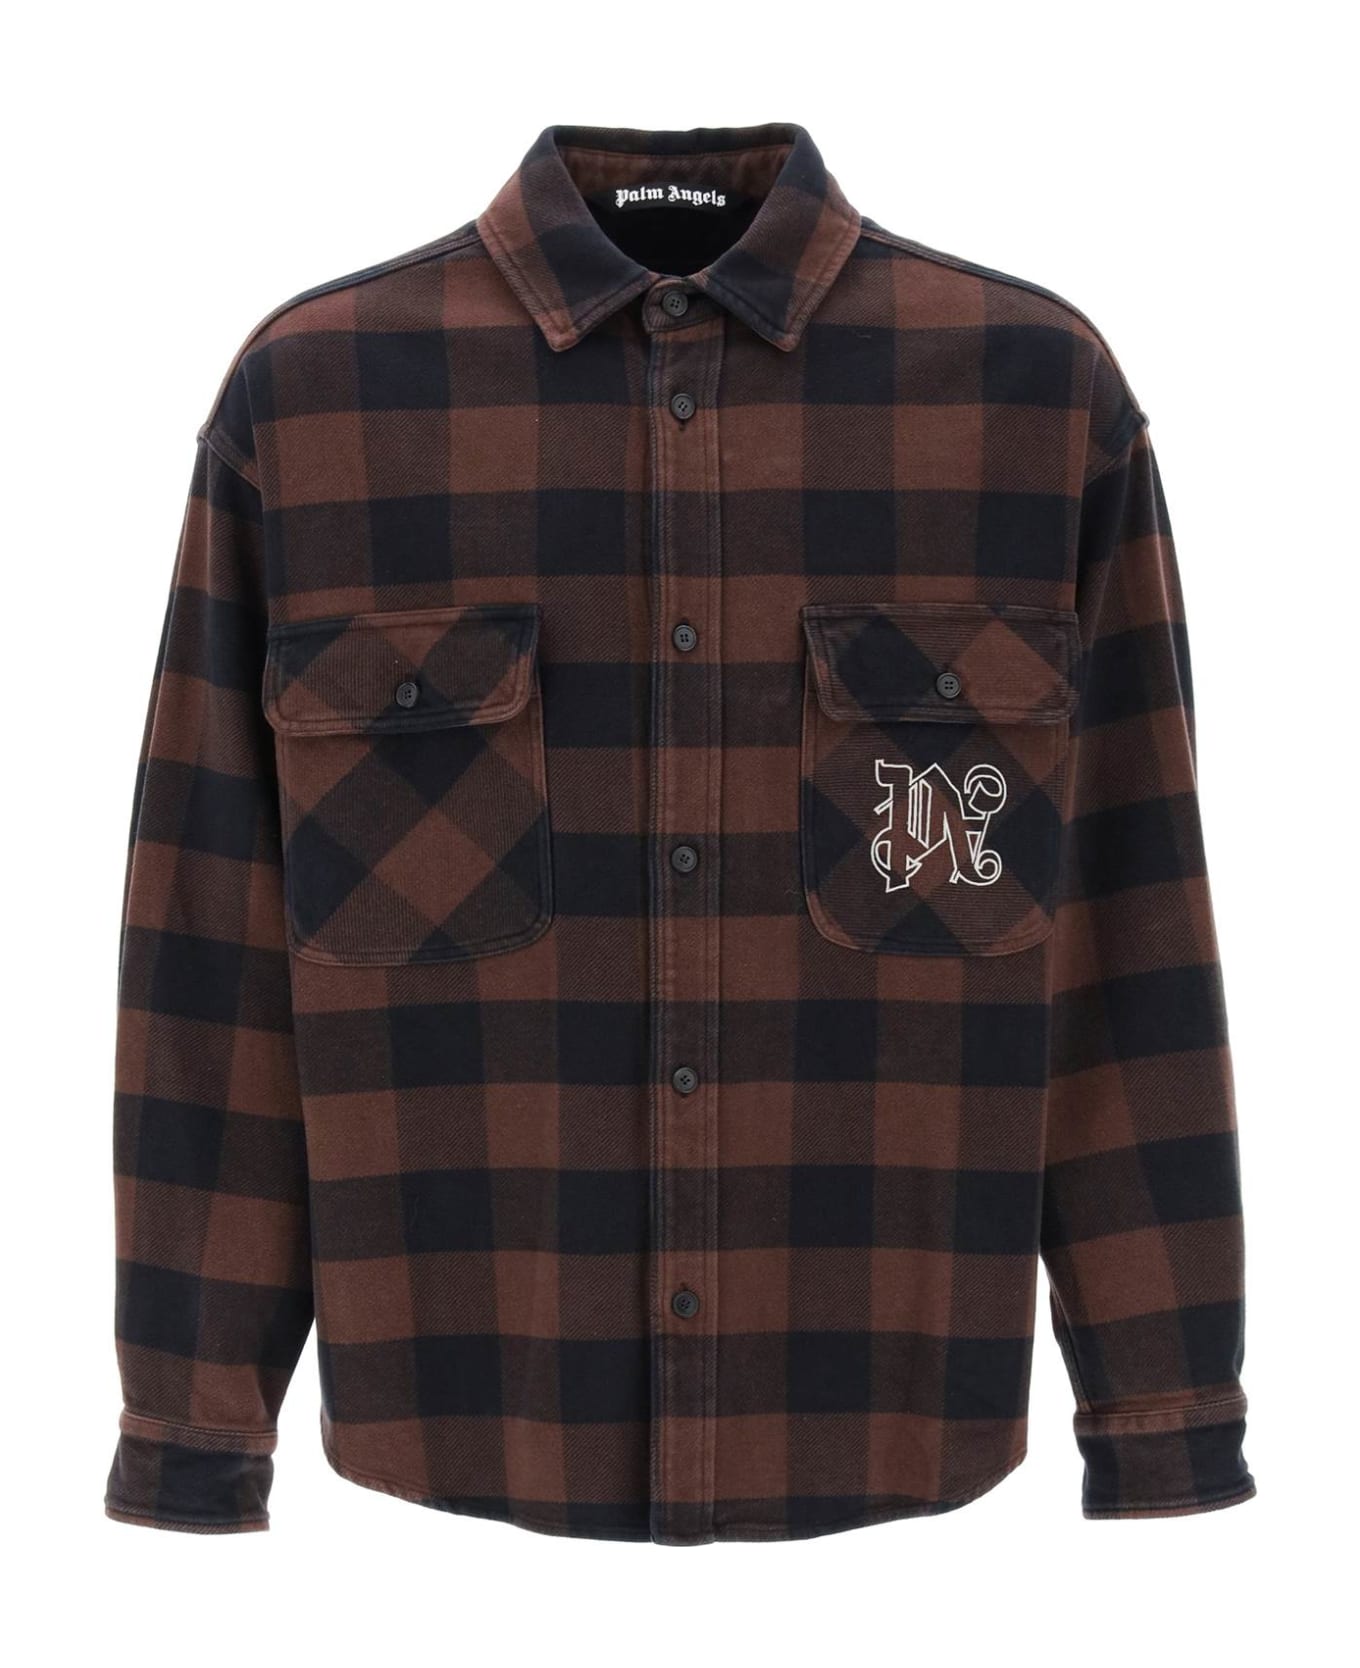 Palm Angels Flannel Overshirt With Check Motif - brown